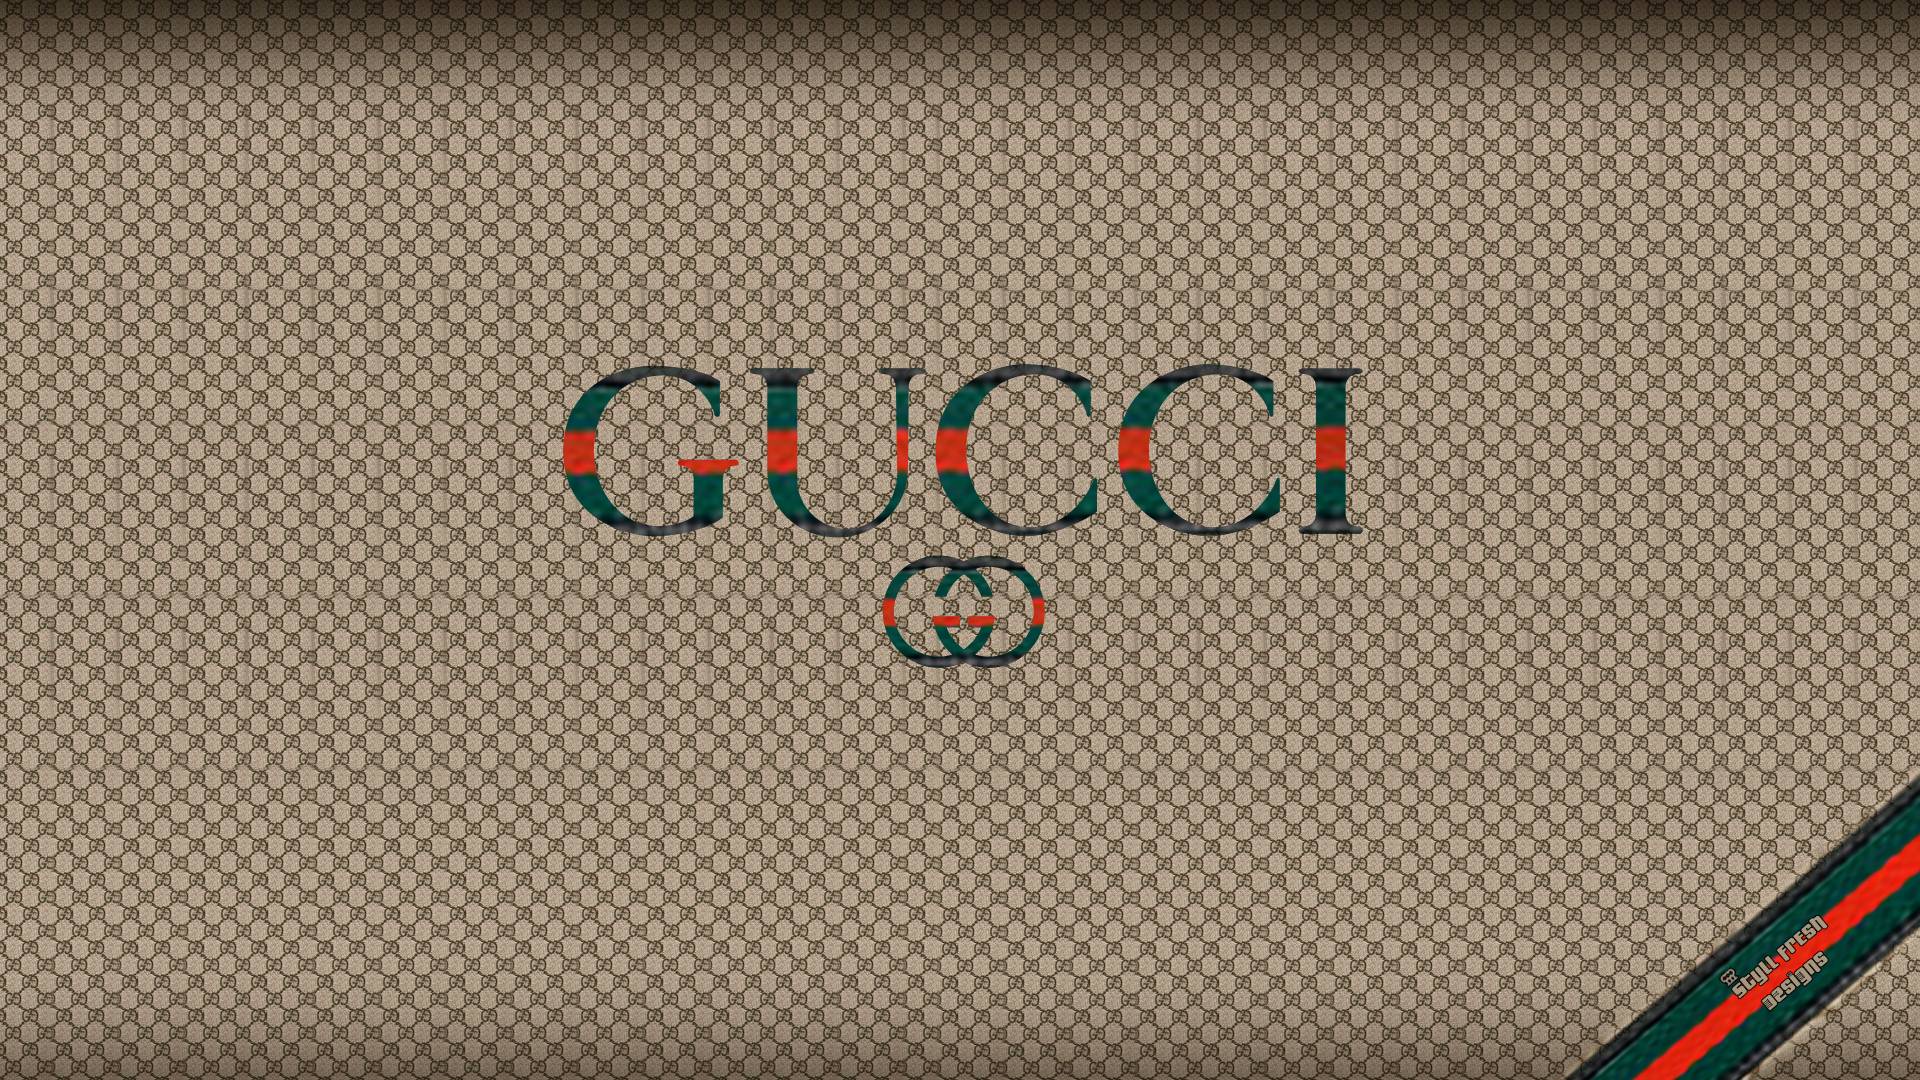 Mickey Gucci Wallpapers - Wallpaper Cave